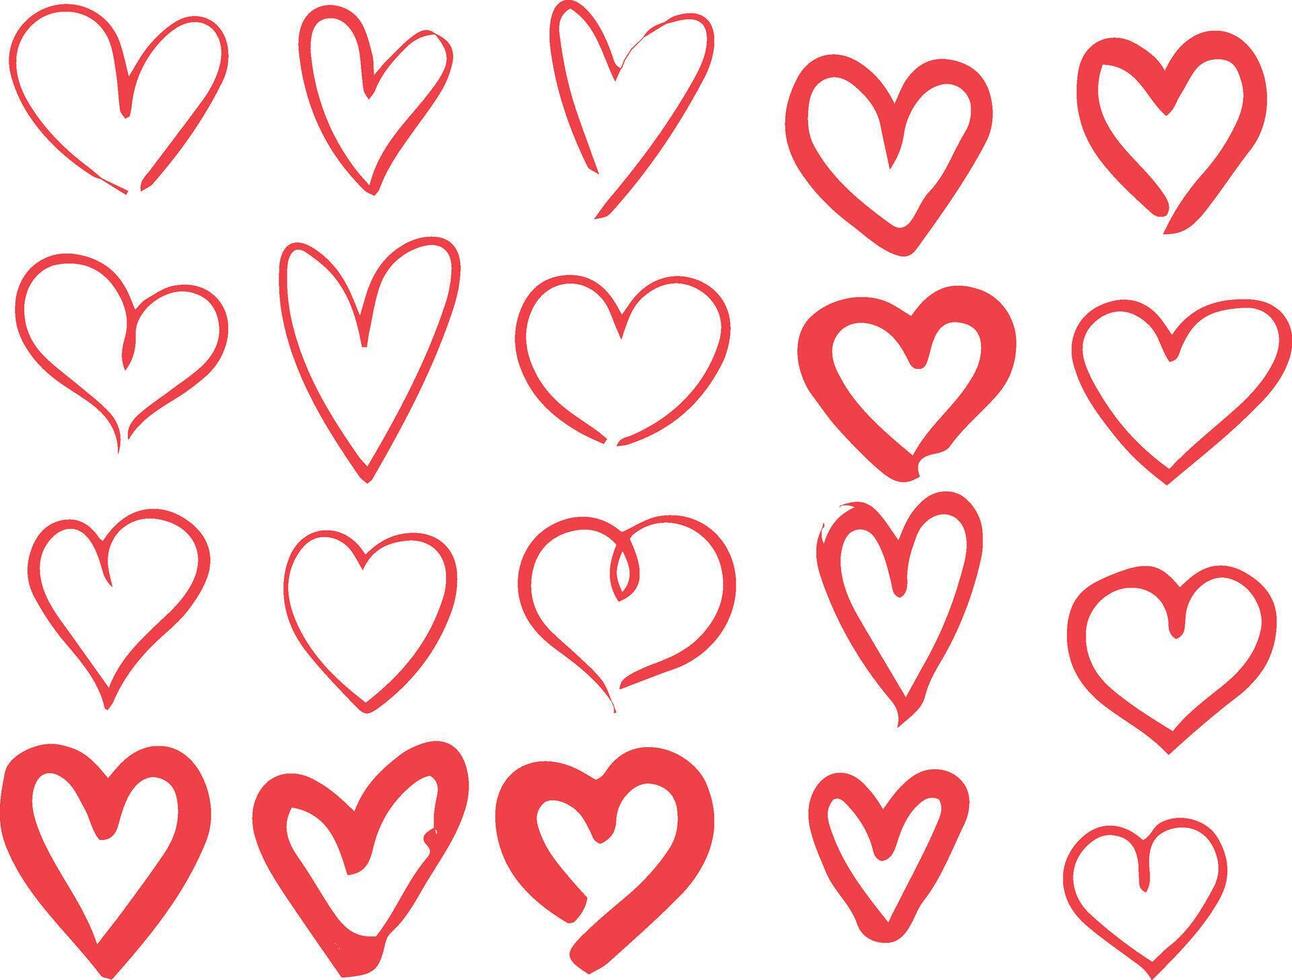 red hand drawn heart icons vector design